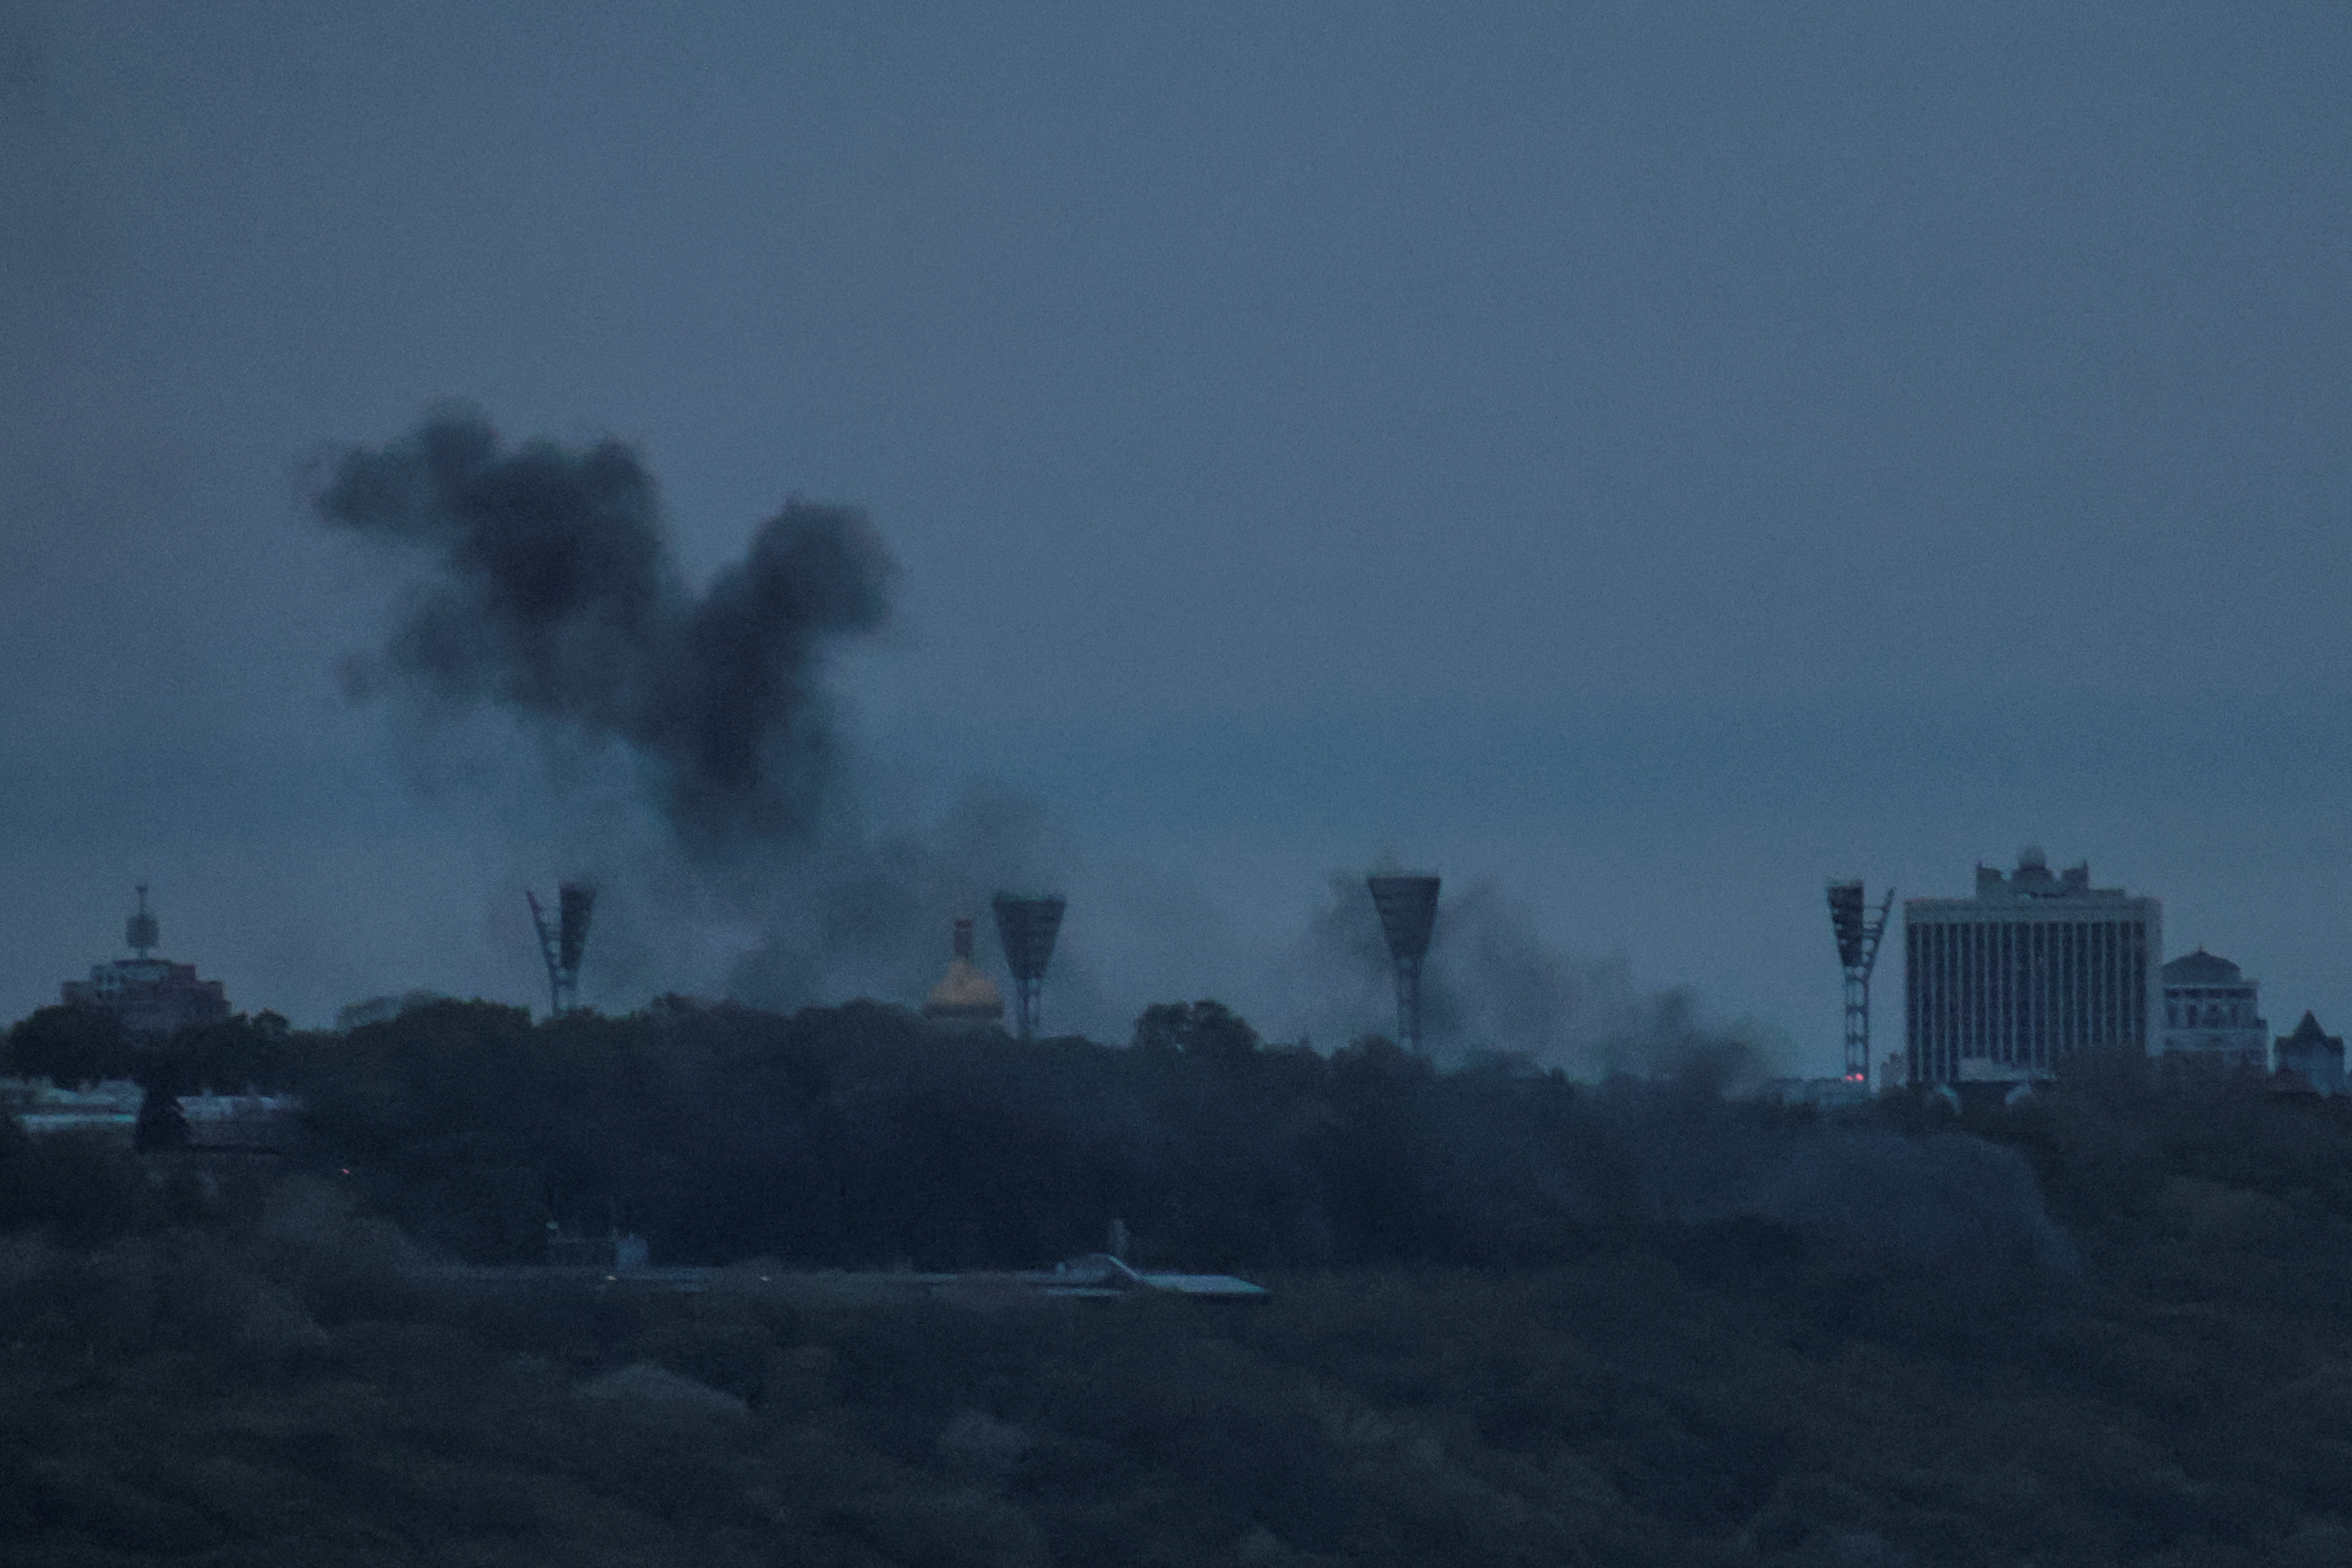 Smoke rises over the city after the wreckage of a downed Russian drone lands on a building in Kiev